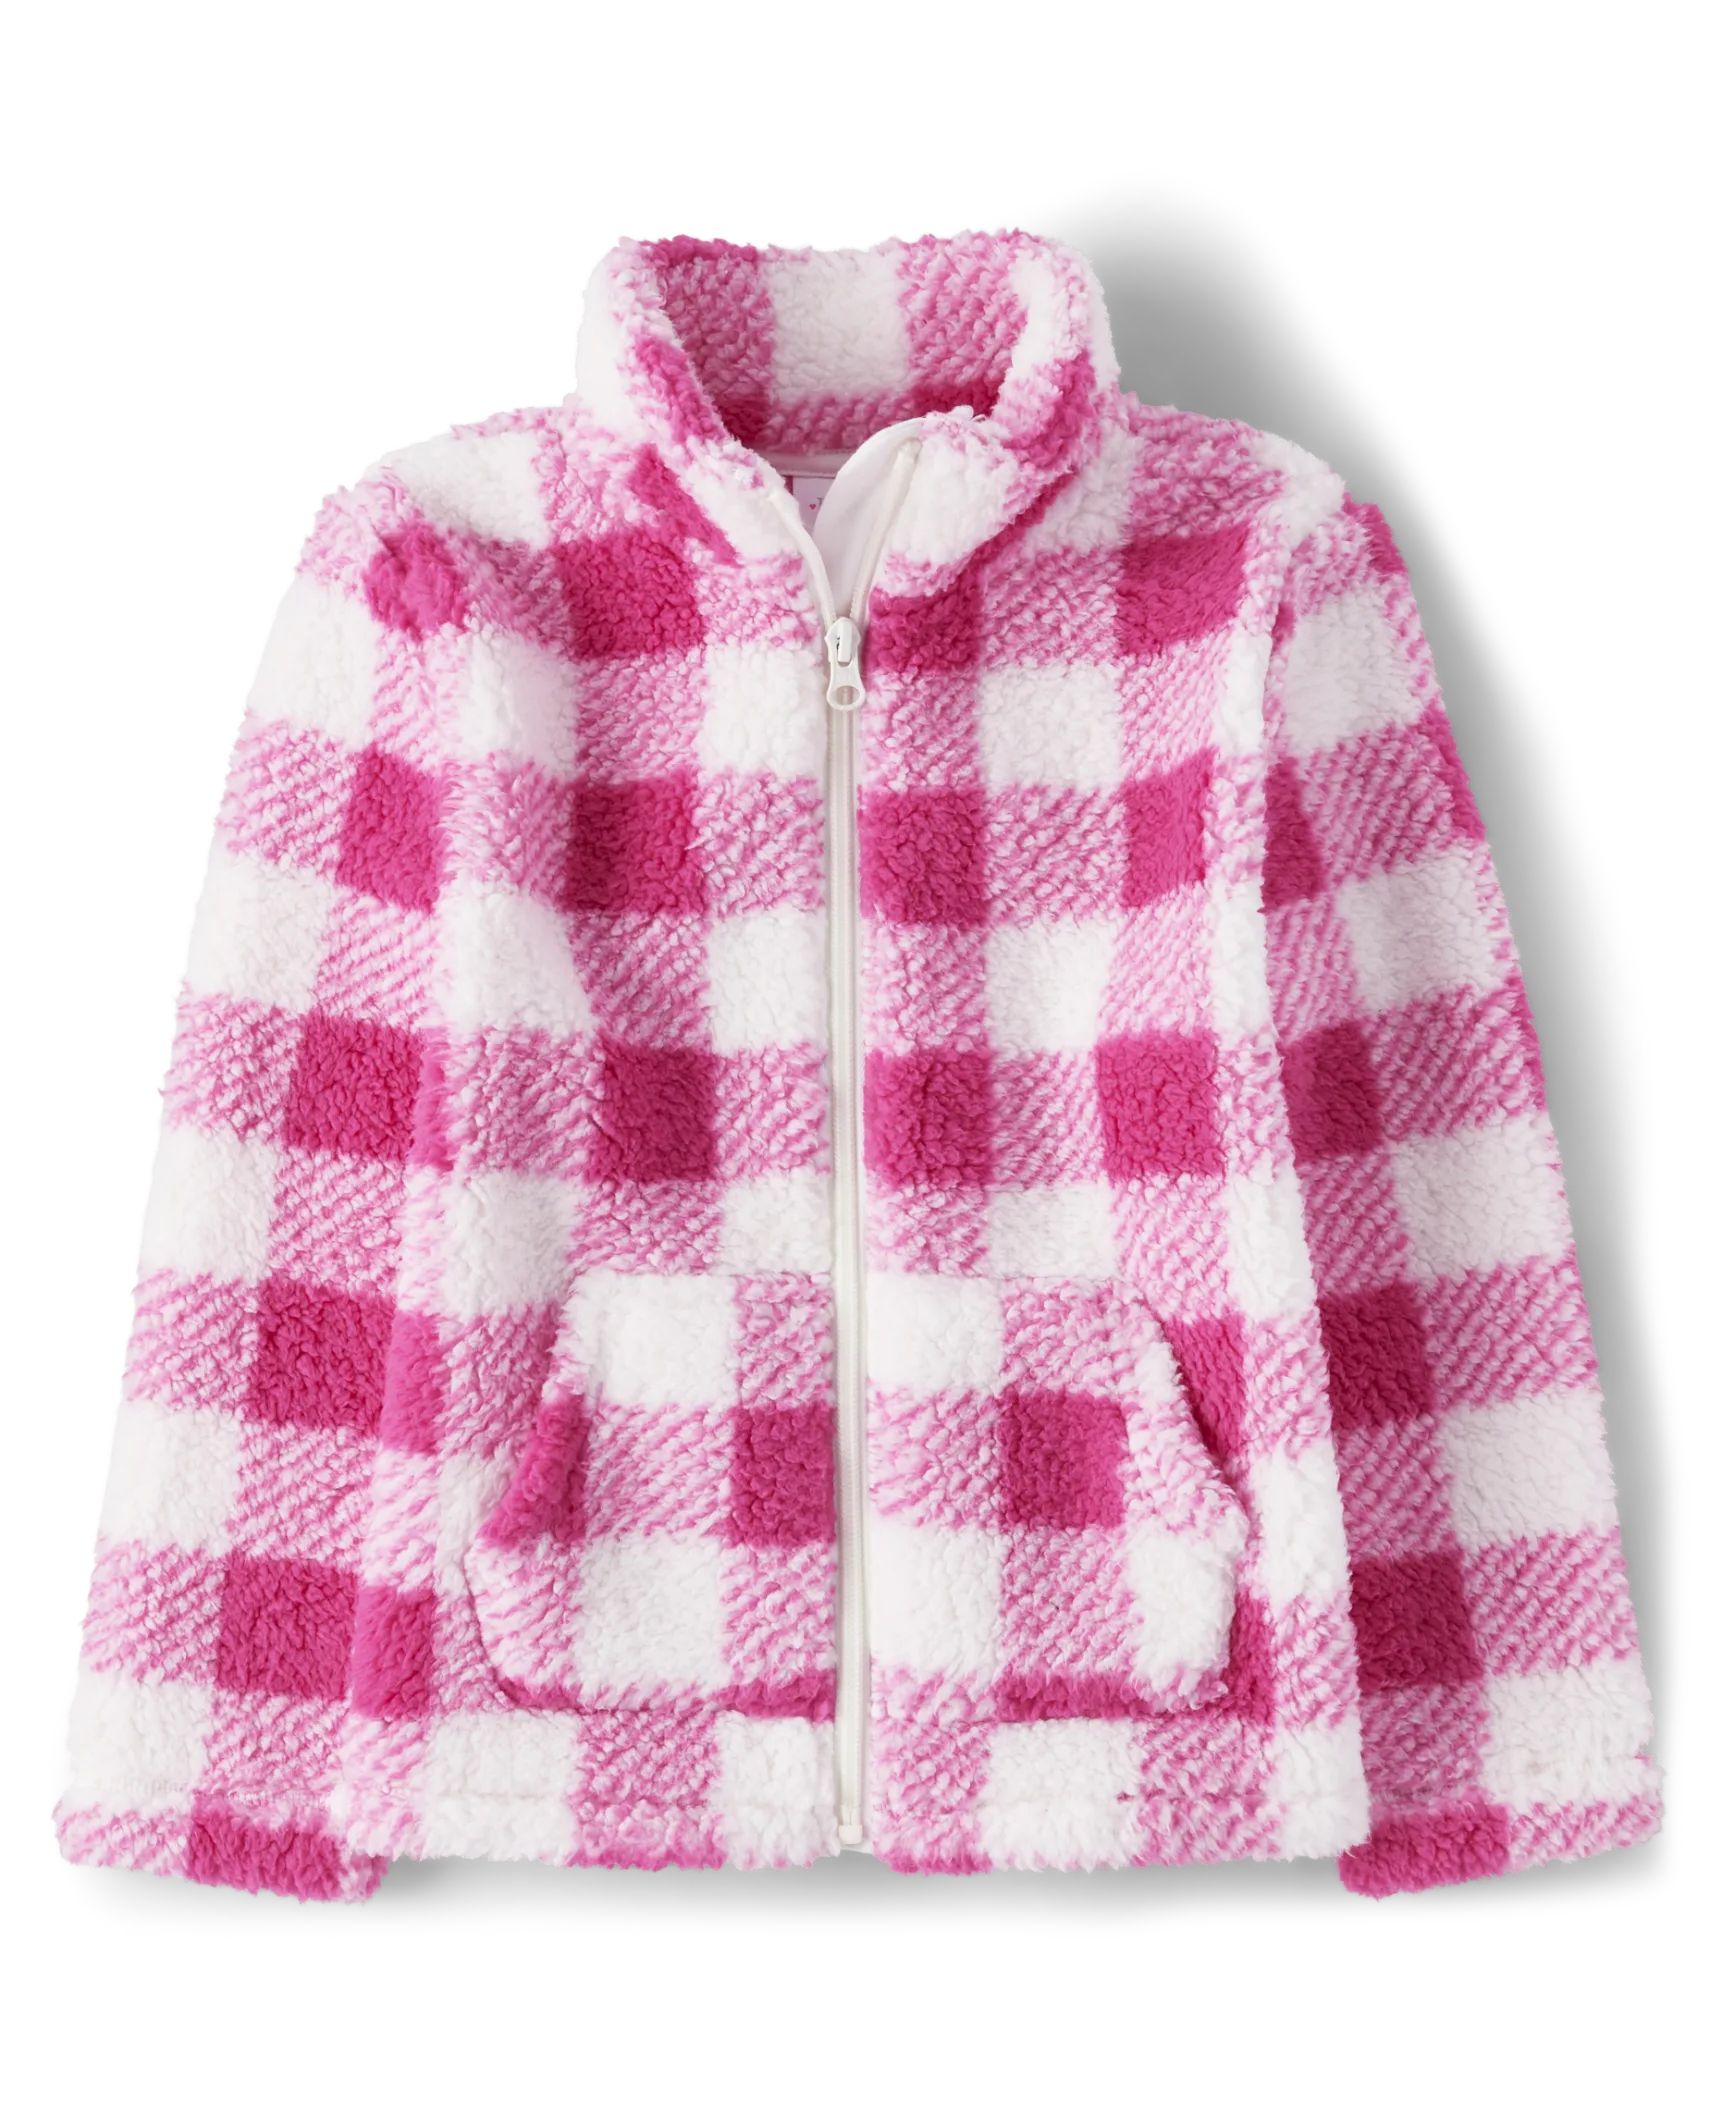 Girls Print Sherpa Zip-Up Jacket - pink glow | The Children's Place